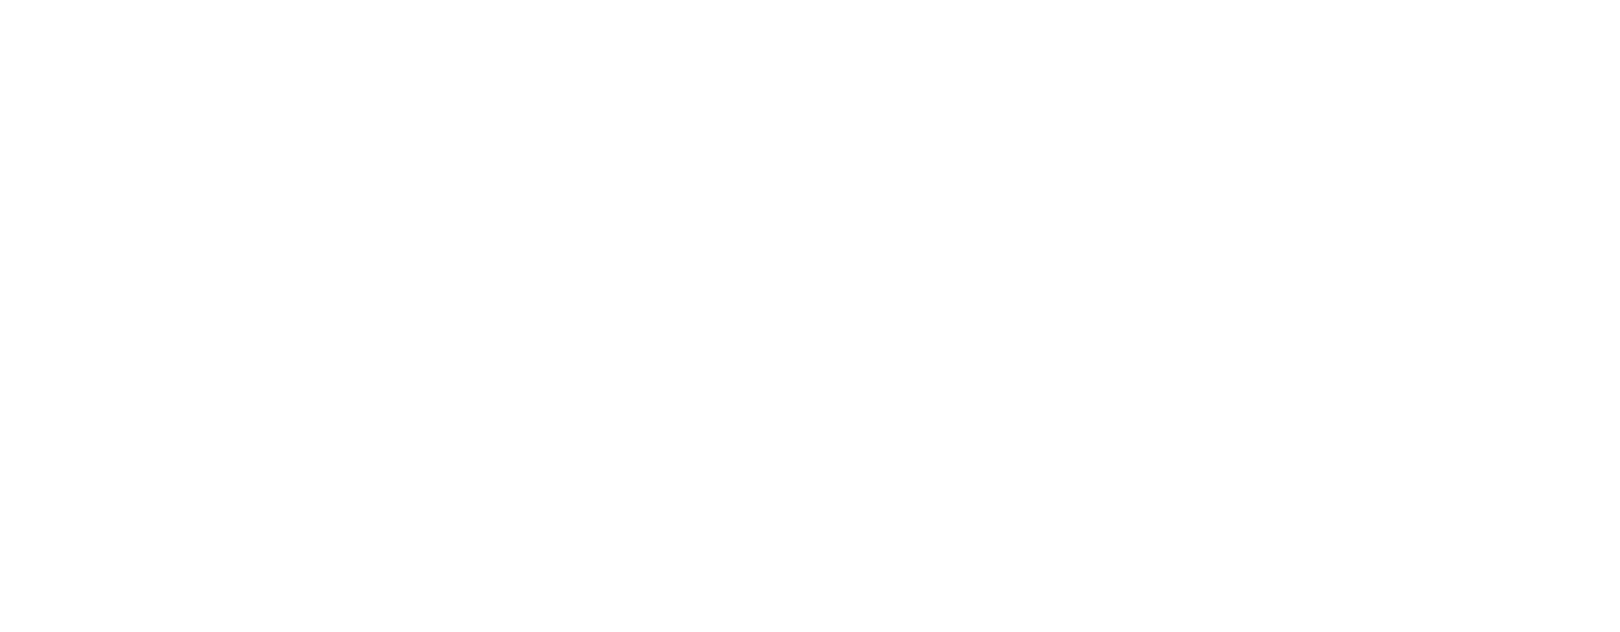 Time for the ocean